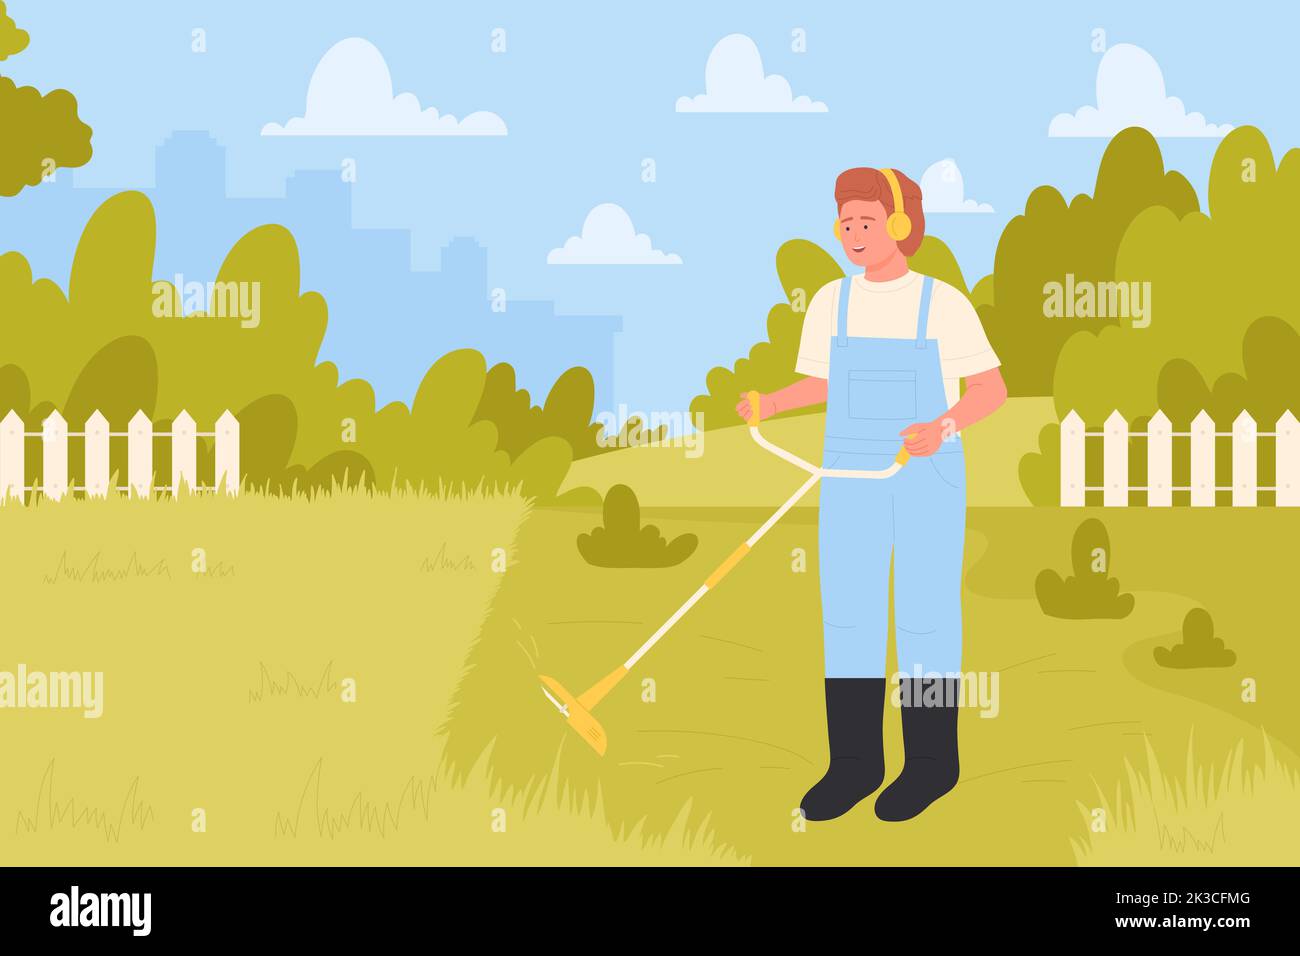 Grass mowing professional service vector illustration. Cartoon worker holding blade lawn trimmer in hands, man with motor power machine gardening and trimming yard or garden landscape background Stock Vector